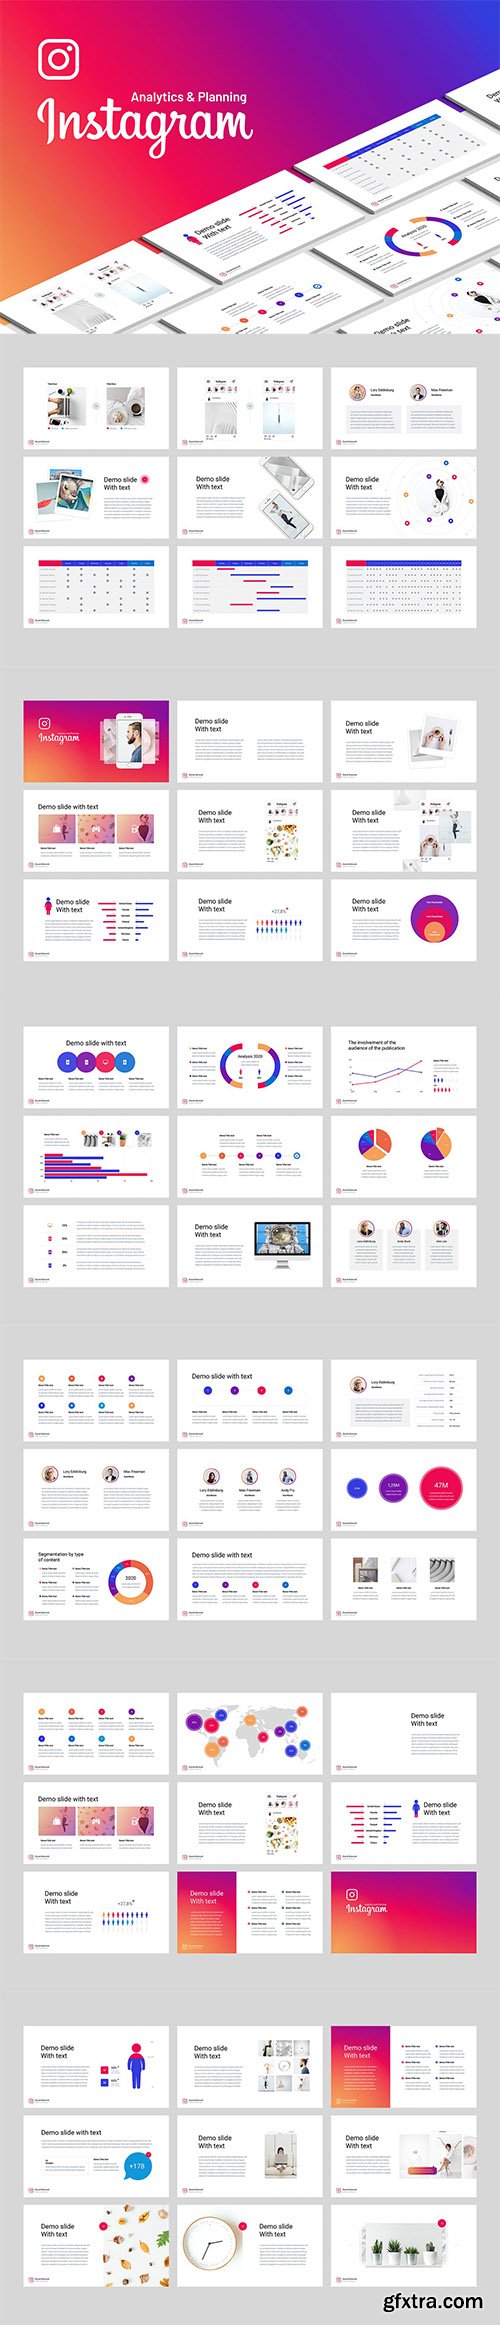 Instagram analysis PowerPoint and Keynote templates